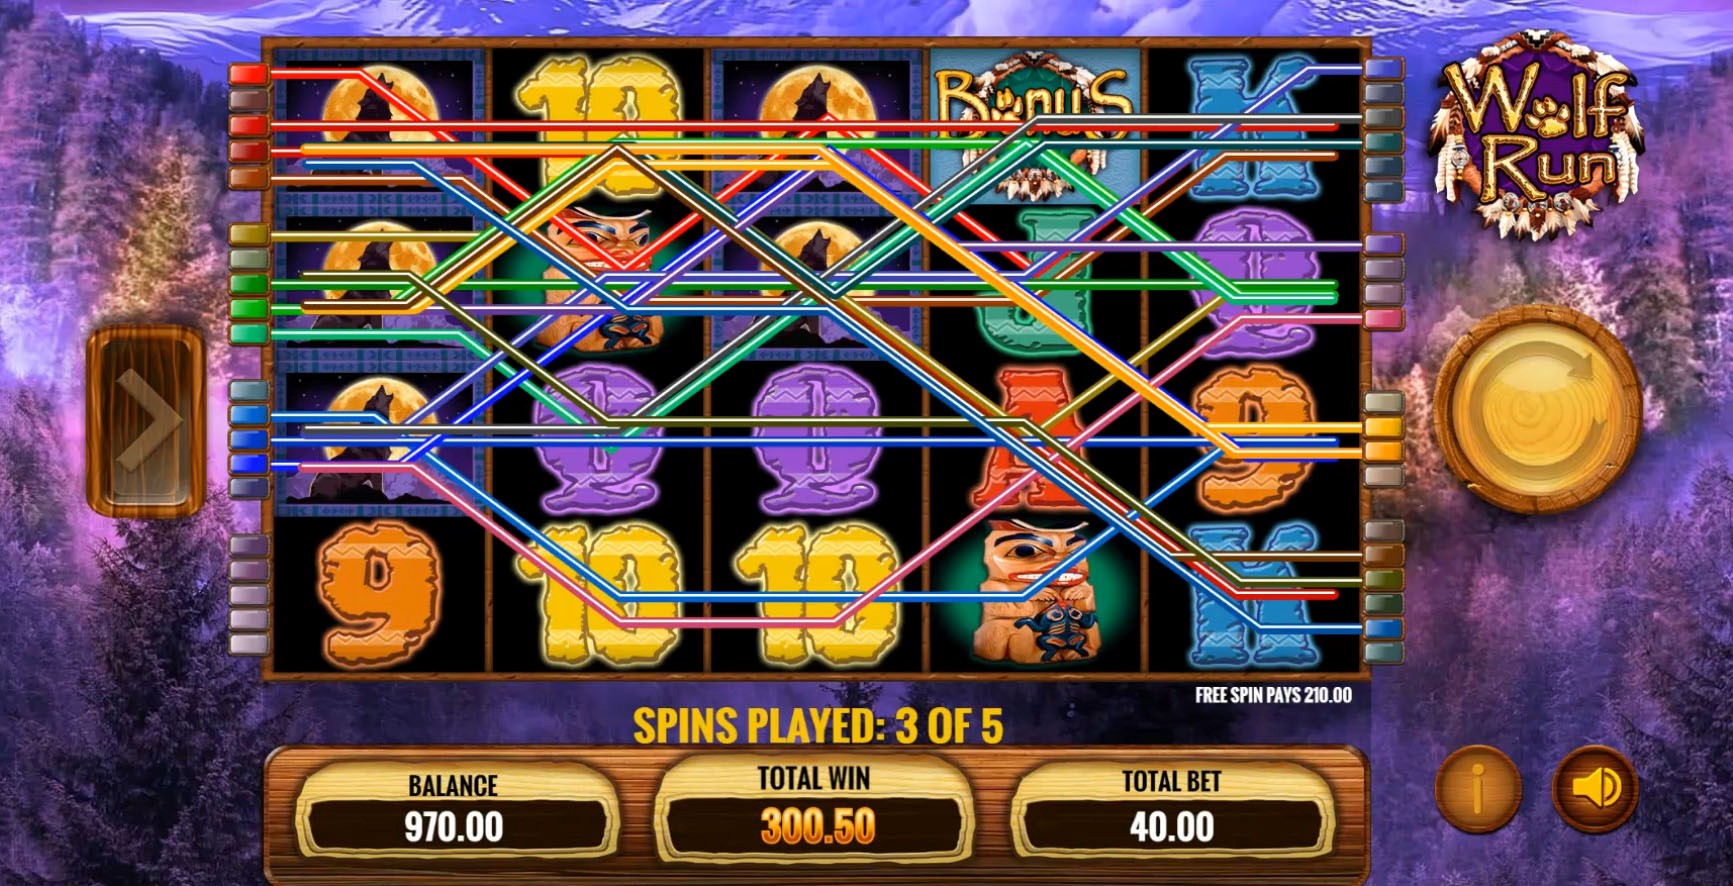 A Free Spins bonus round in progress on the mobile version of IGT’s Wolf Run slot machine